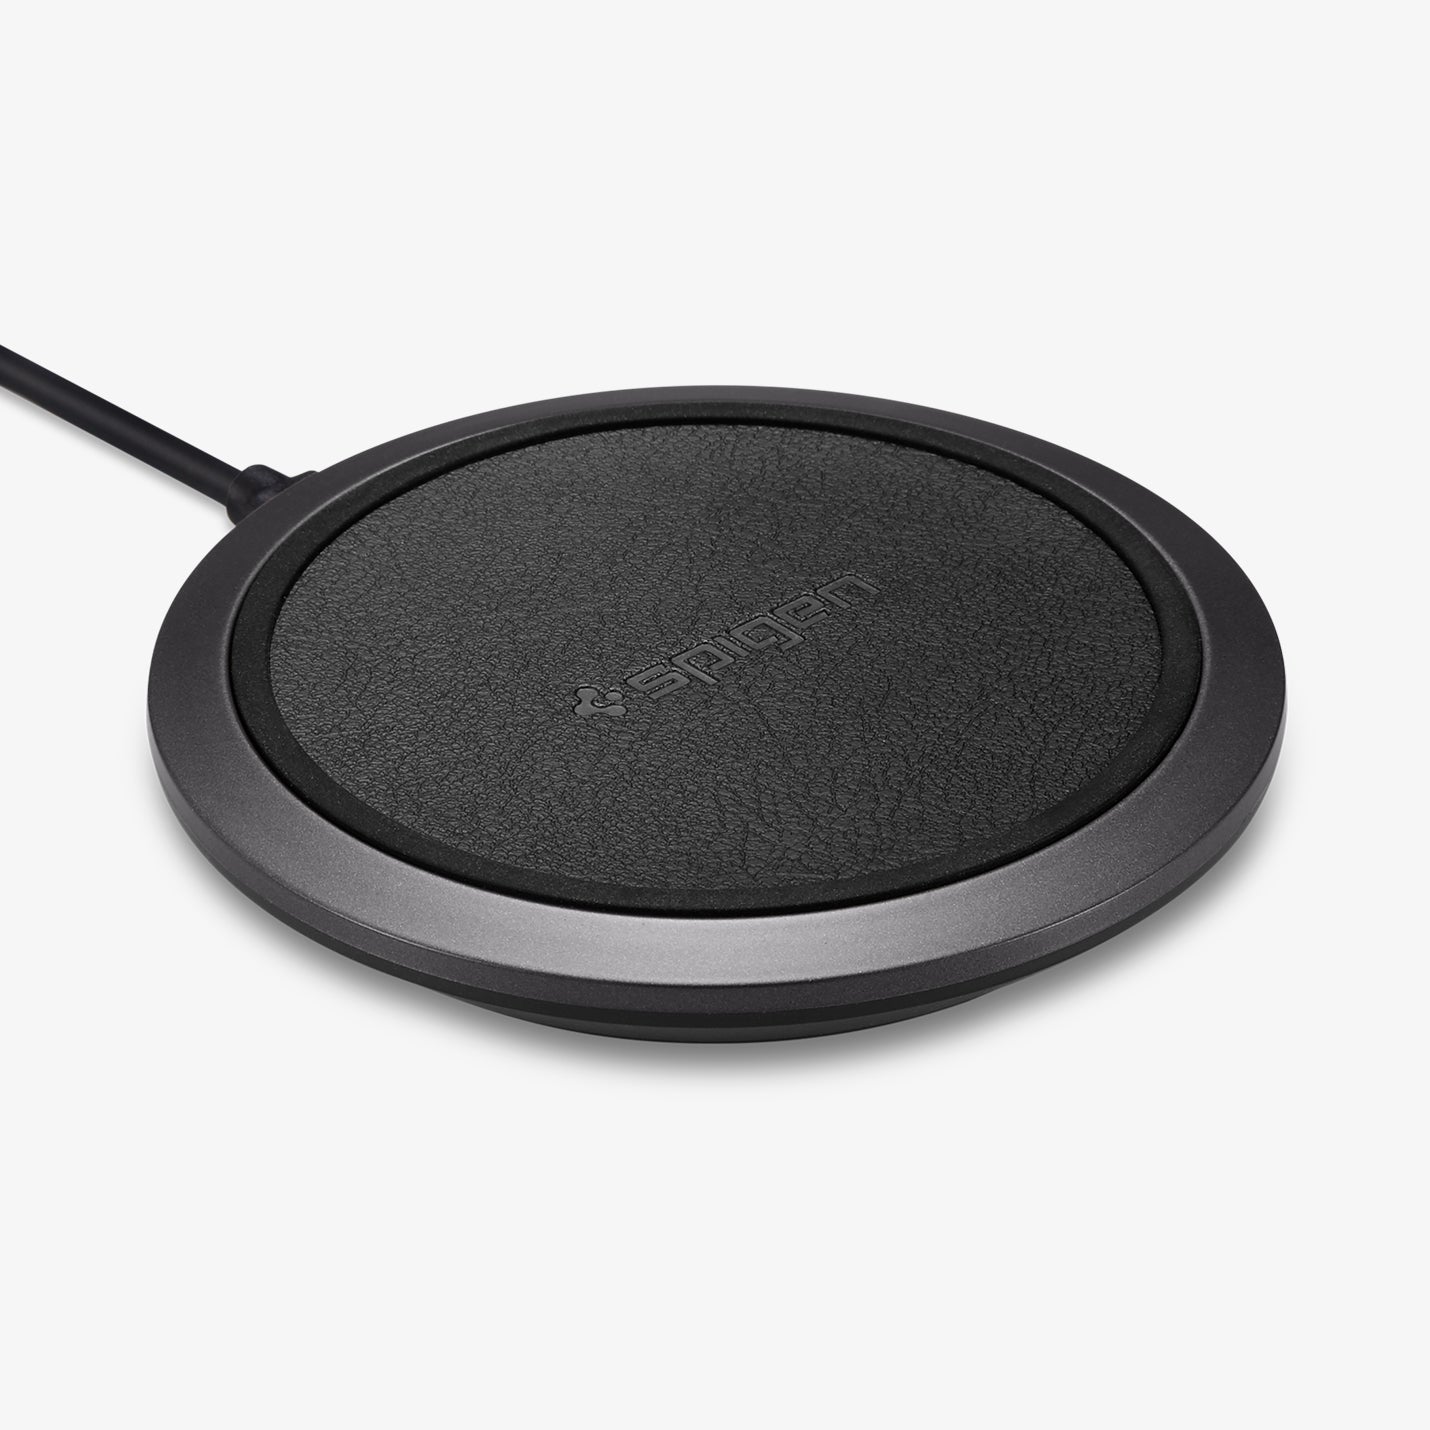 000CH23122 - Essential® Leather Designed 10W Wireless Charger F308W in black showing the front, top and side